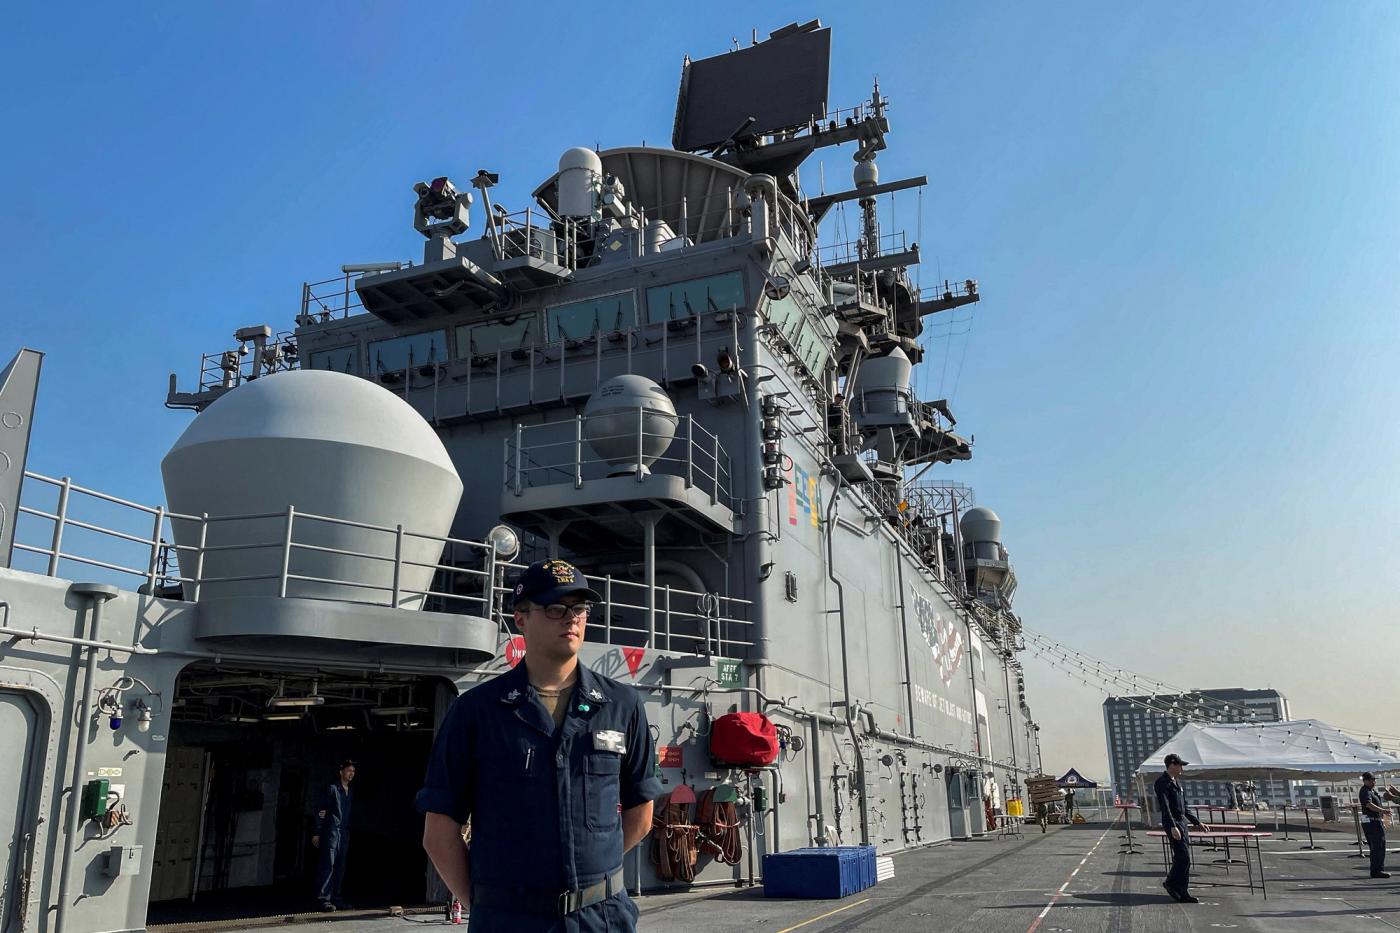 A sailor stands on the deck of the USS America (LHA-6) amphibious assault ship docked at a port in Manila, Philippines, March 21, 2023. REUTERS/Adrian Portugal